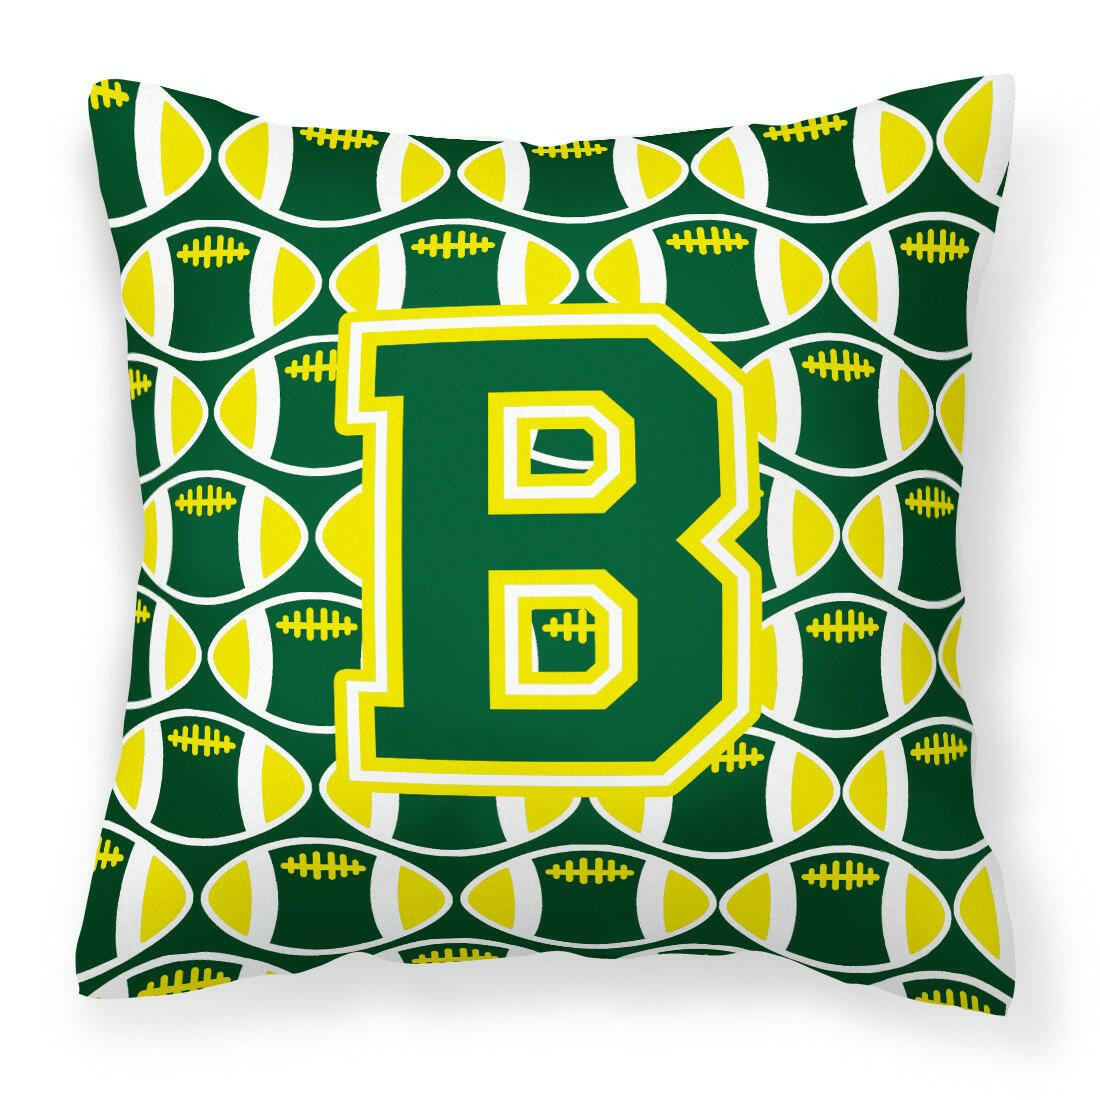 Letter B Football Green and Yellow Fabric Decorative Pillow CJ1075-BPW1414 by Caroline's Treasures